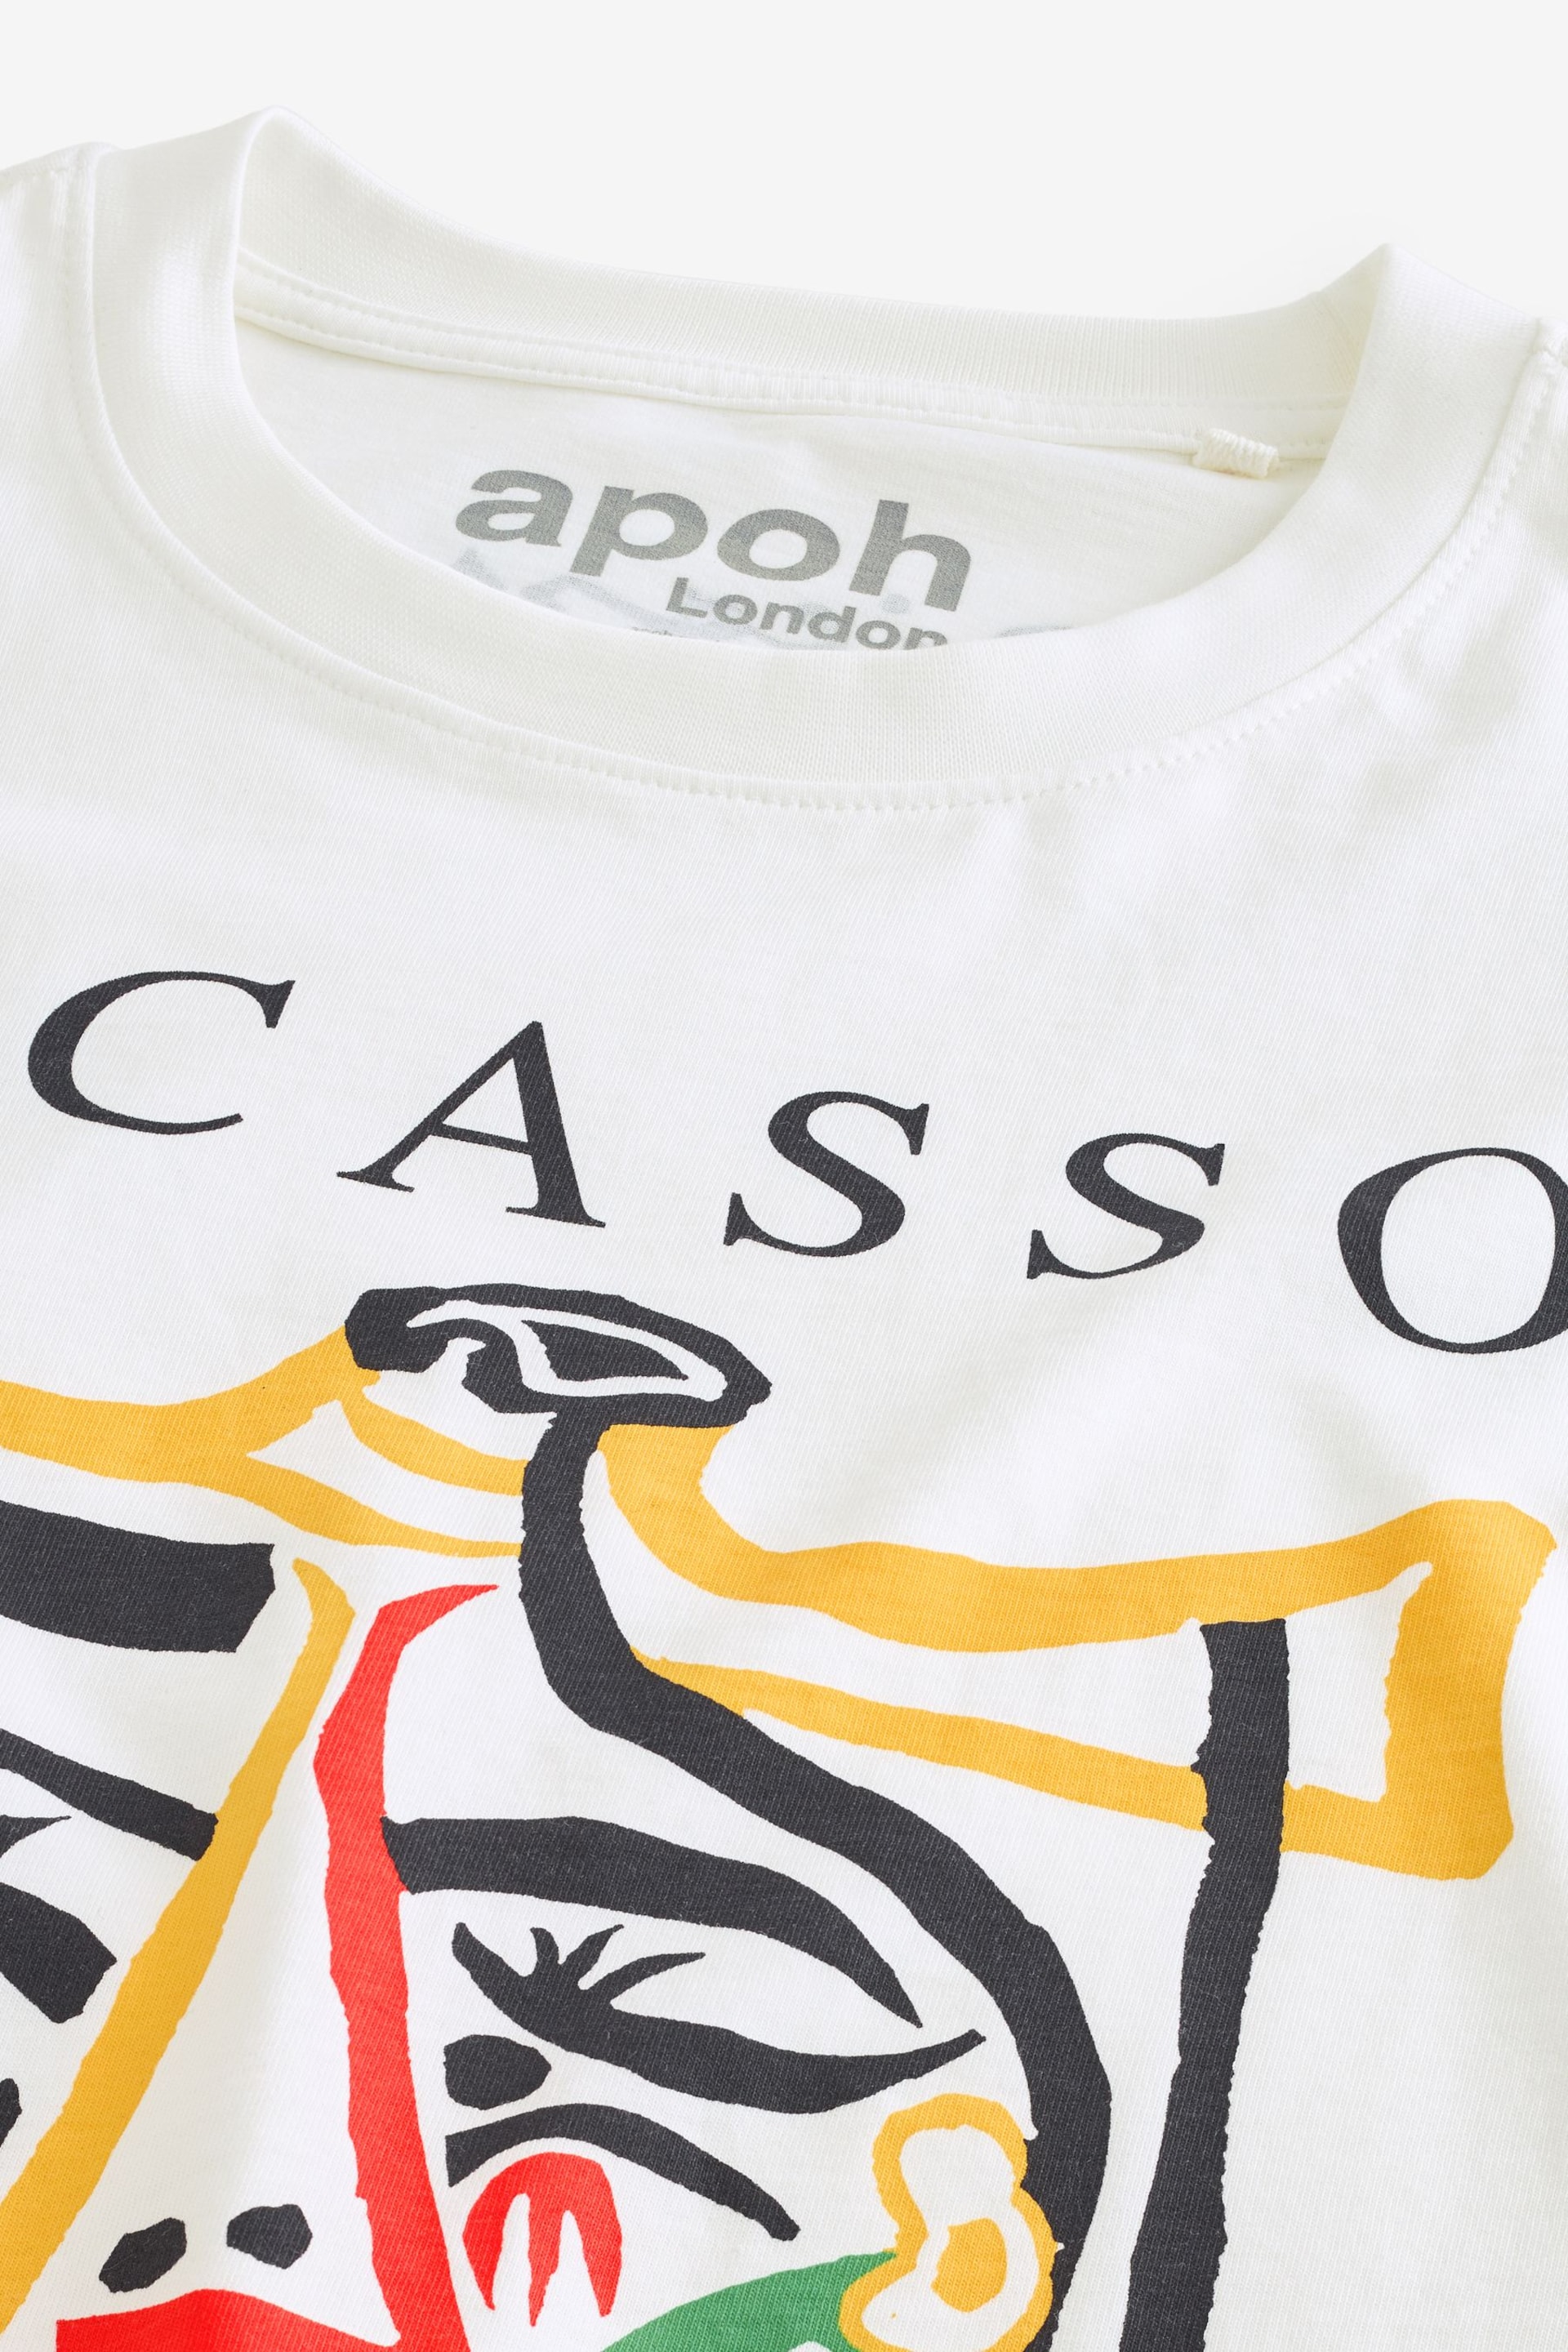 White Picasso Artist Licence T-Shirt - Image 6 of 7